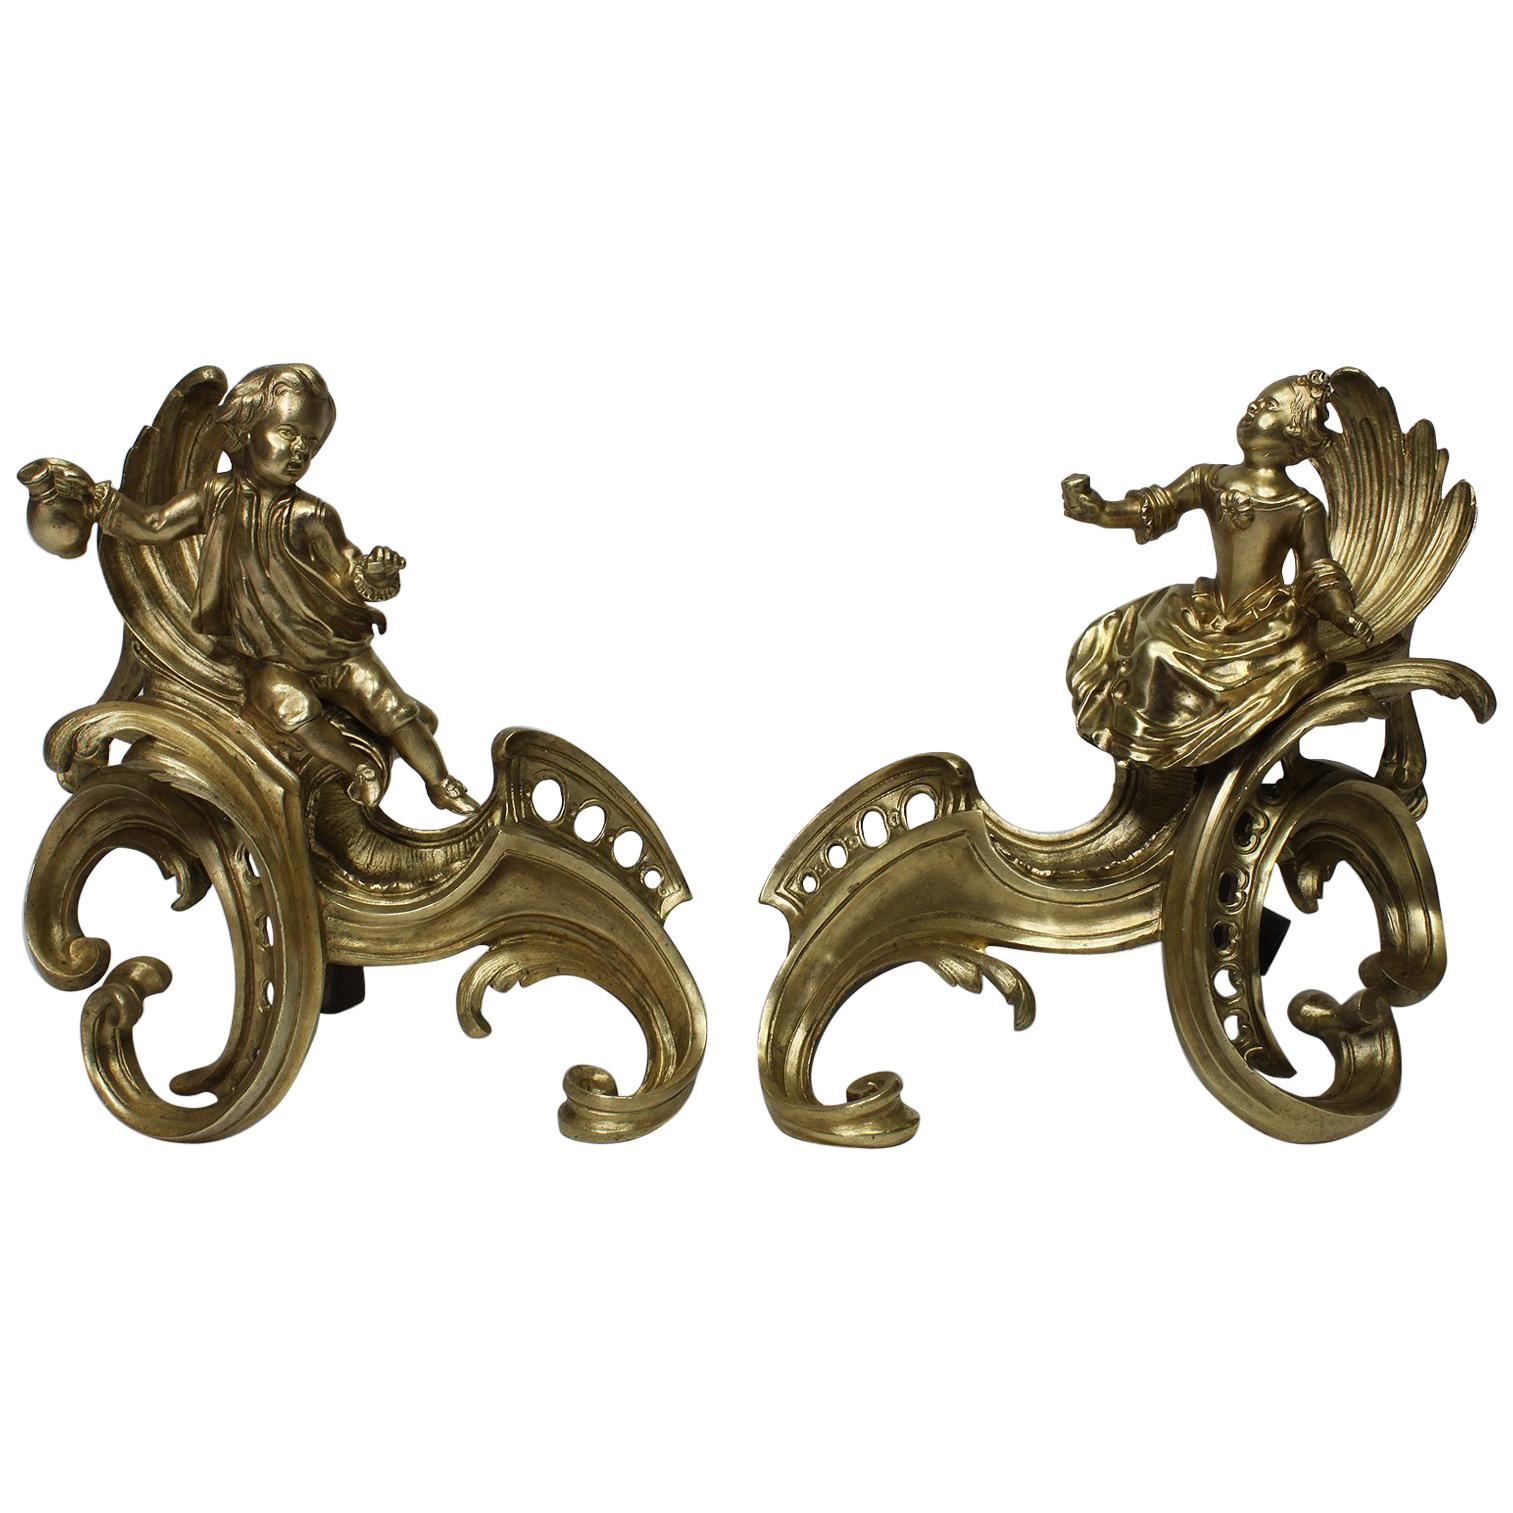 Pair of French Early 19th Century Louis XV Style Gilt-Bronze Andirons Chenets